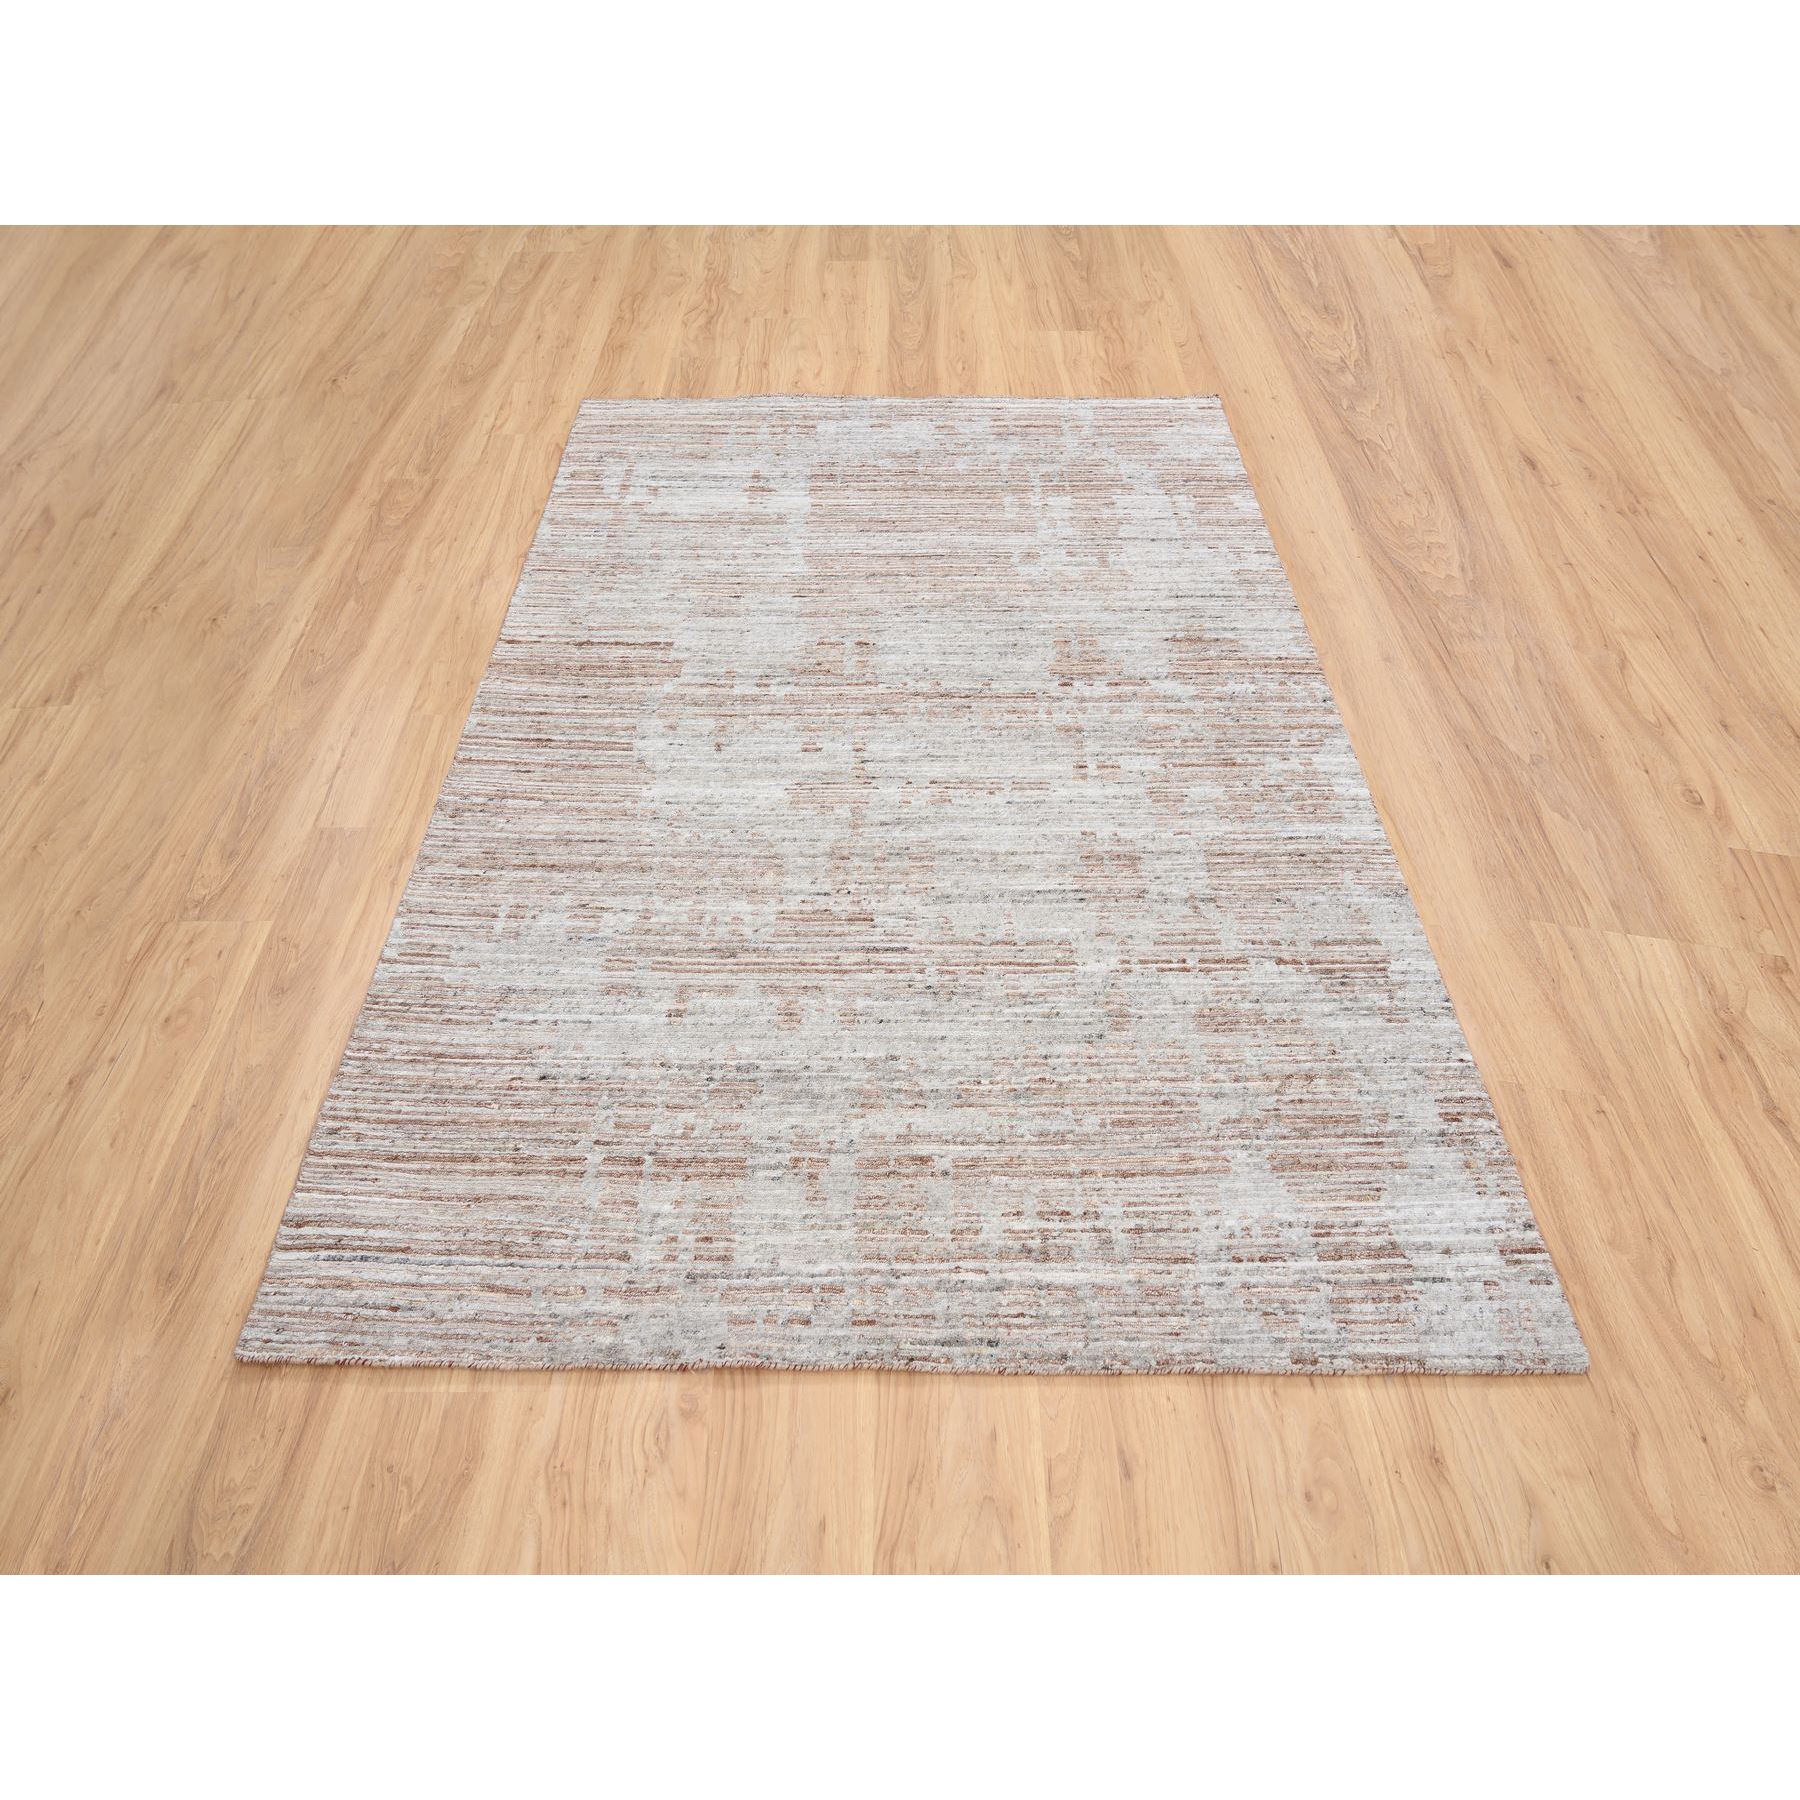 5'4"x7'7" Ivory, Wool and Silk Hand Woven, Modern Design Cut and Loop Pile, Oriental Rug 